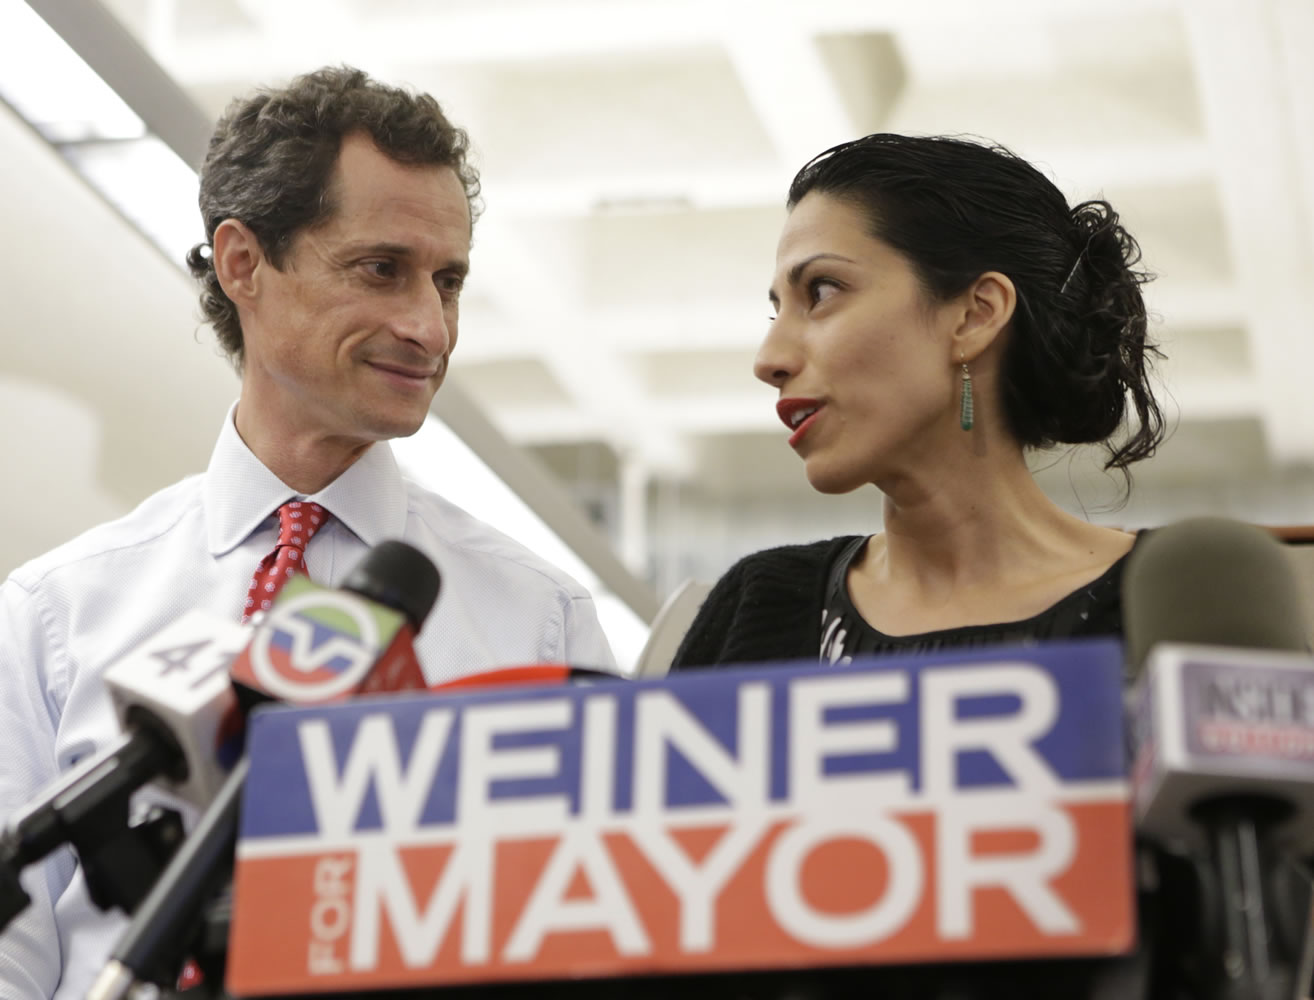 Huma Abedin, alongside her husband, New York mayoral candidate Anthony Weiner, speaks during a news conference at the Gay Men's Health Crisis headquarters in New York on Tuesday.